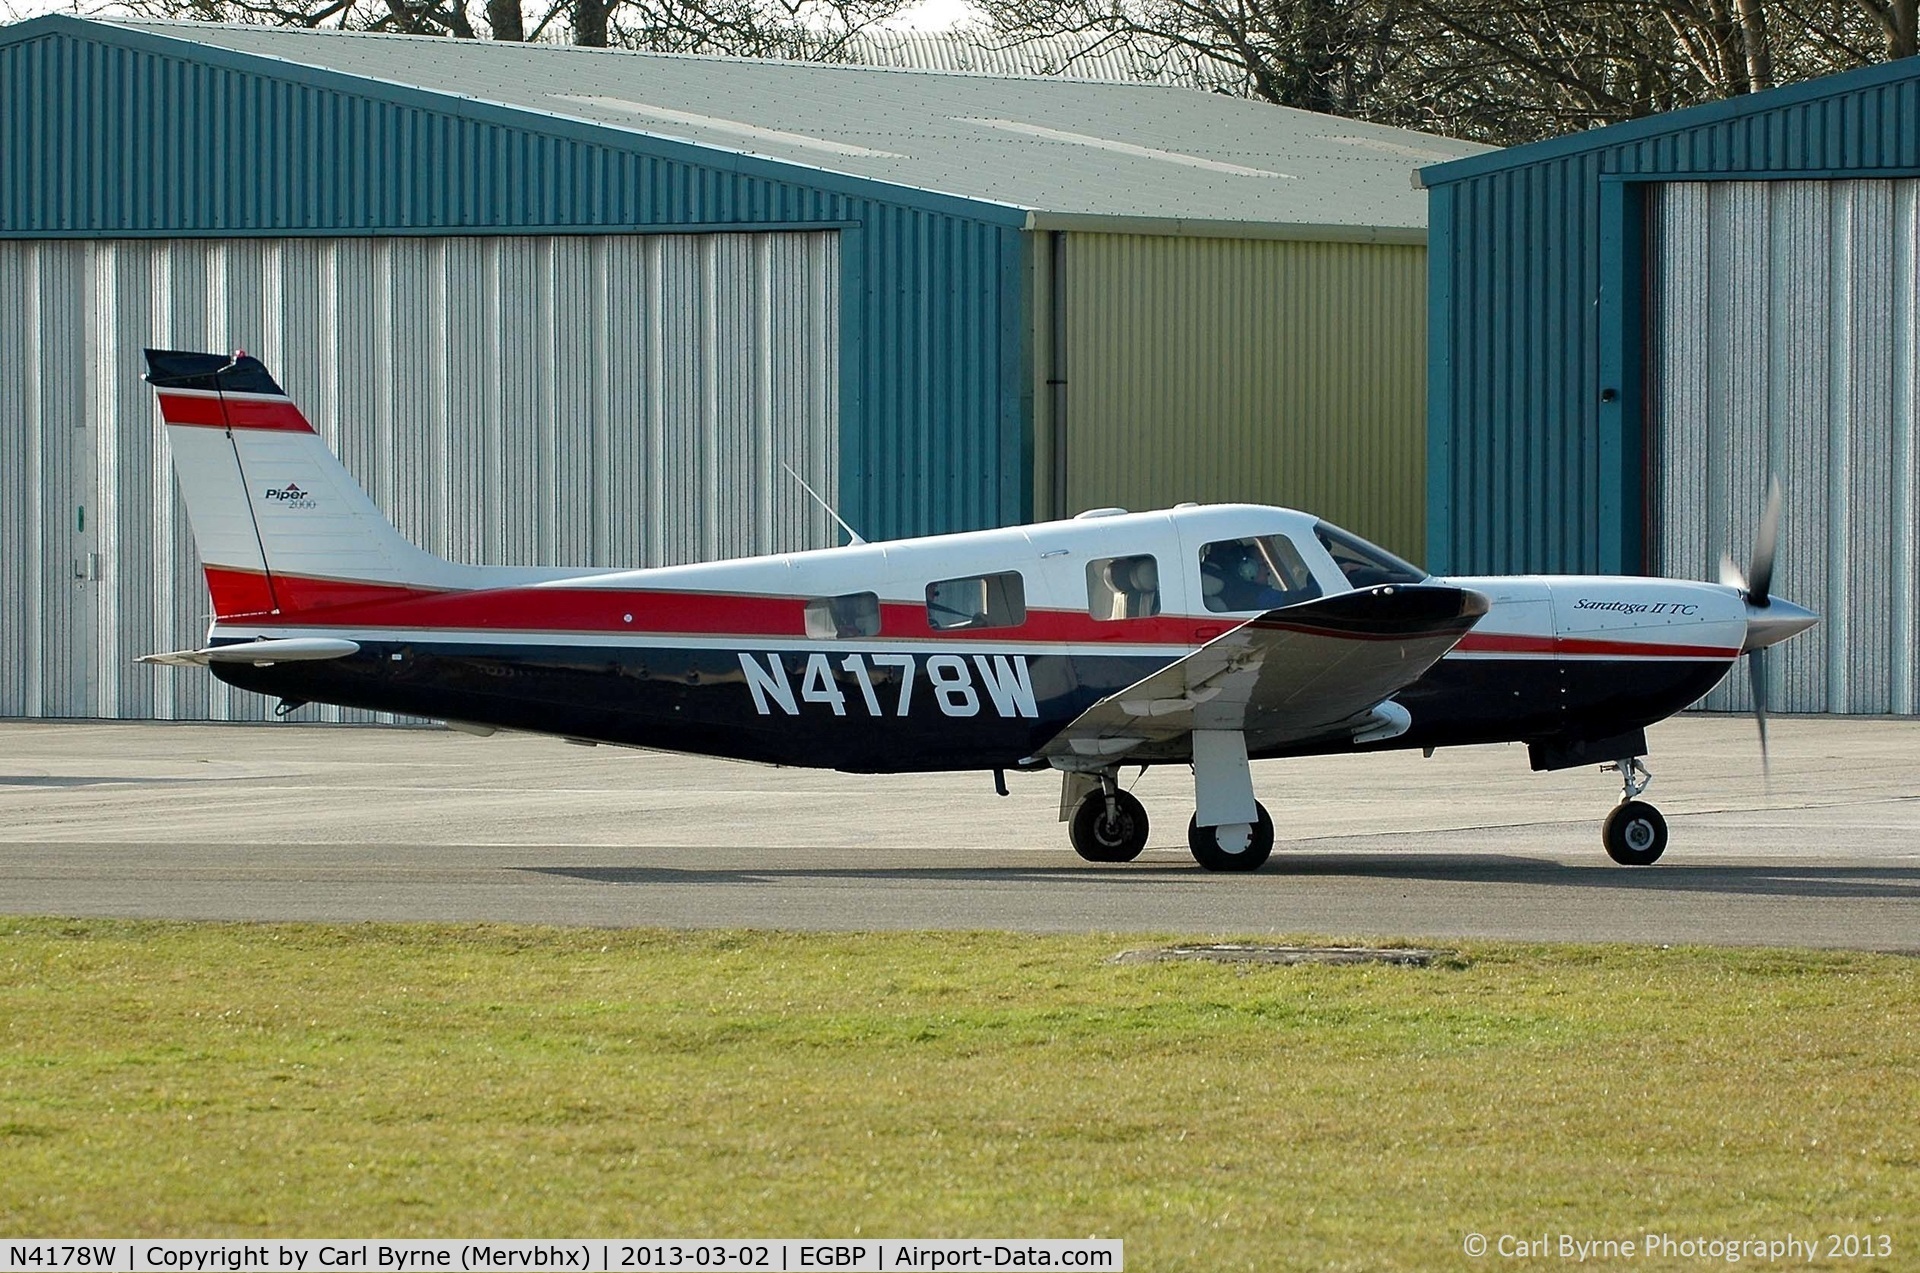 N4178W, 2000 Piper PA-32R-301T Turbo Saratoga C/N 3257178, An afternoon visitor.